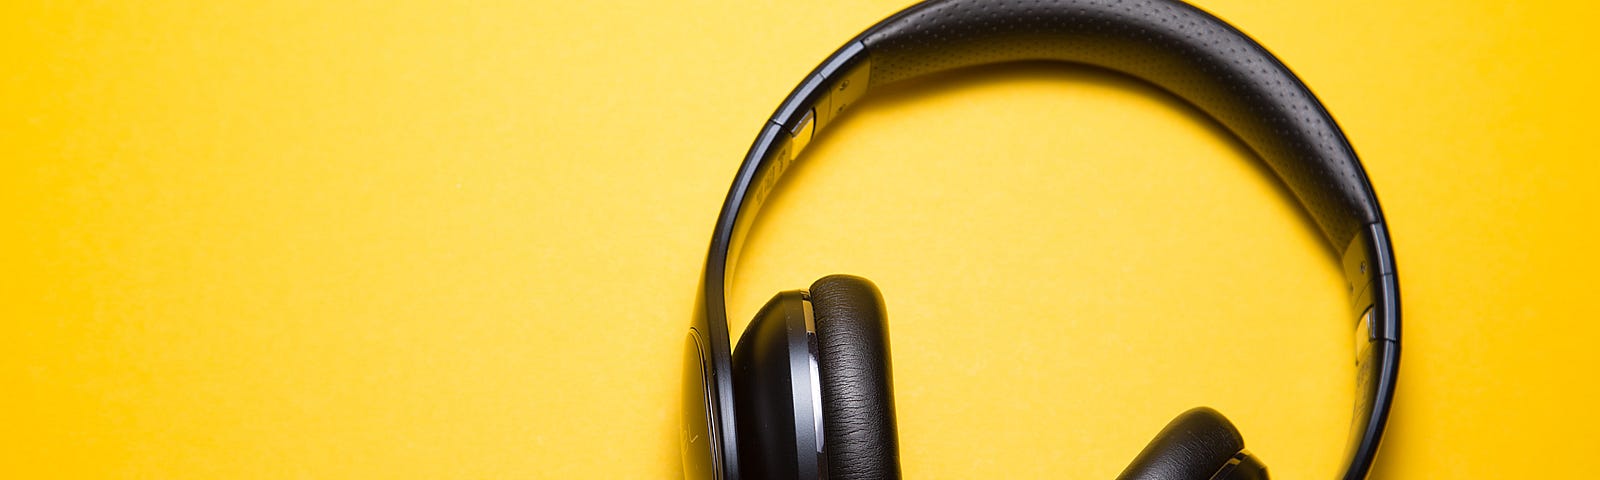 black headphones on a yellow background for listening to a data science podcast